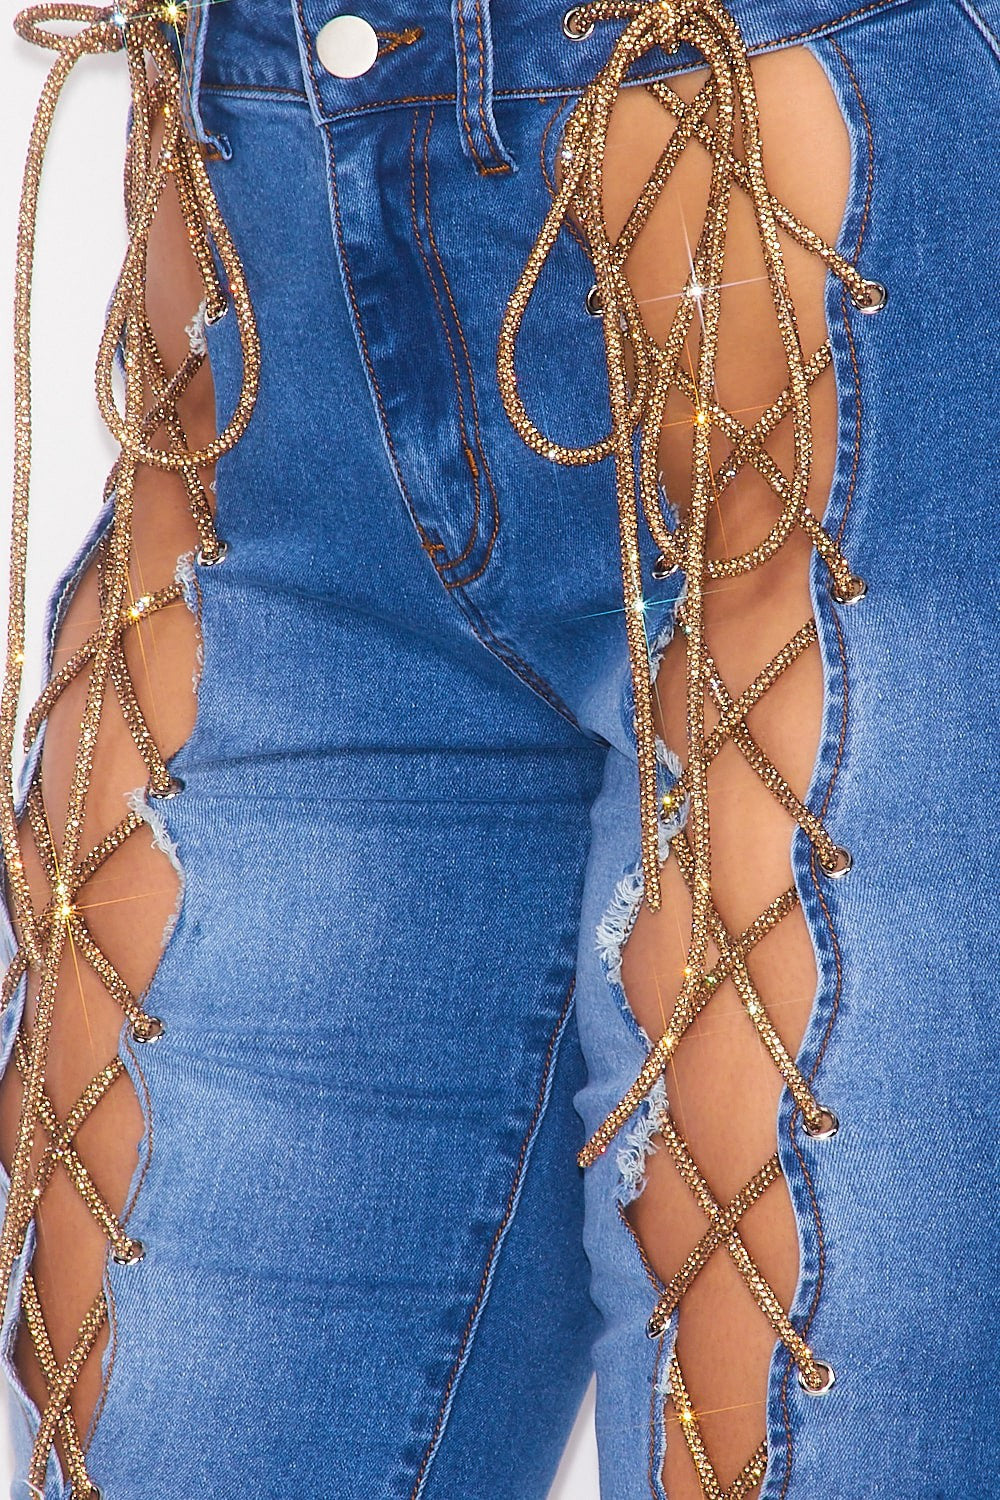 Back in Love Lace-up Jeans